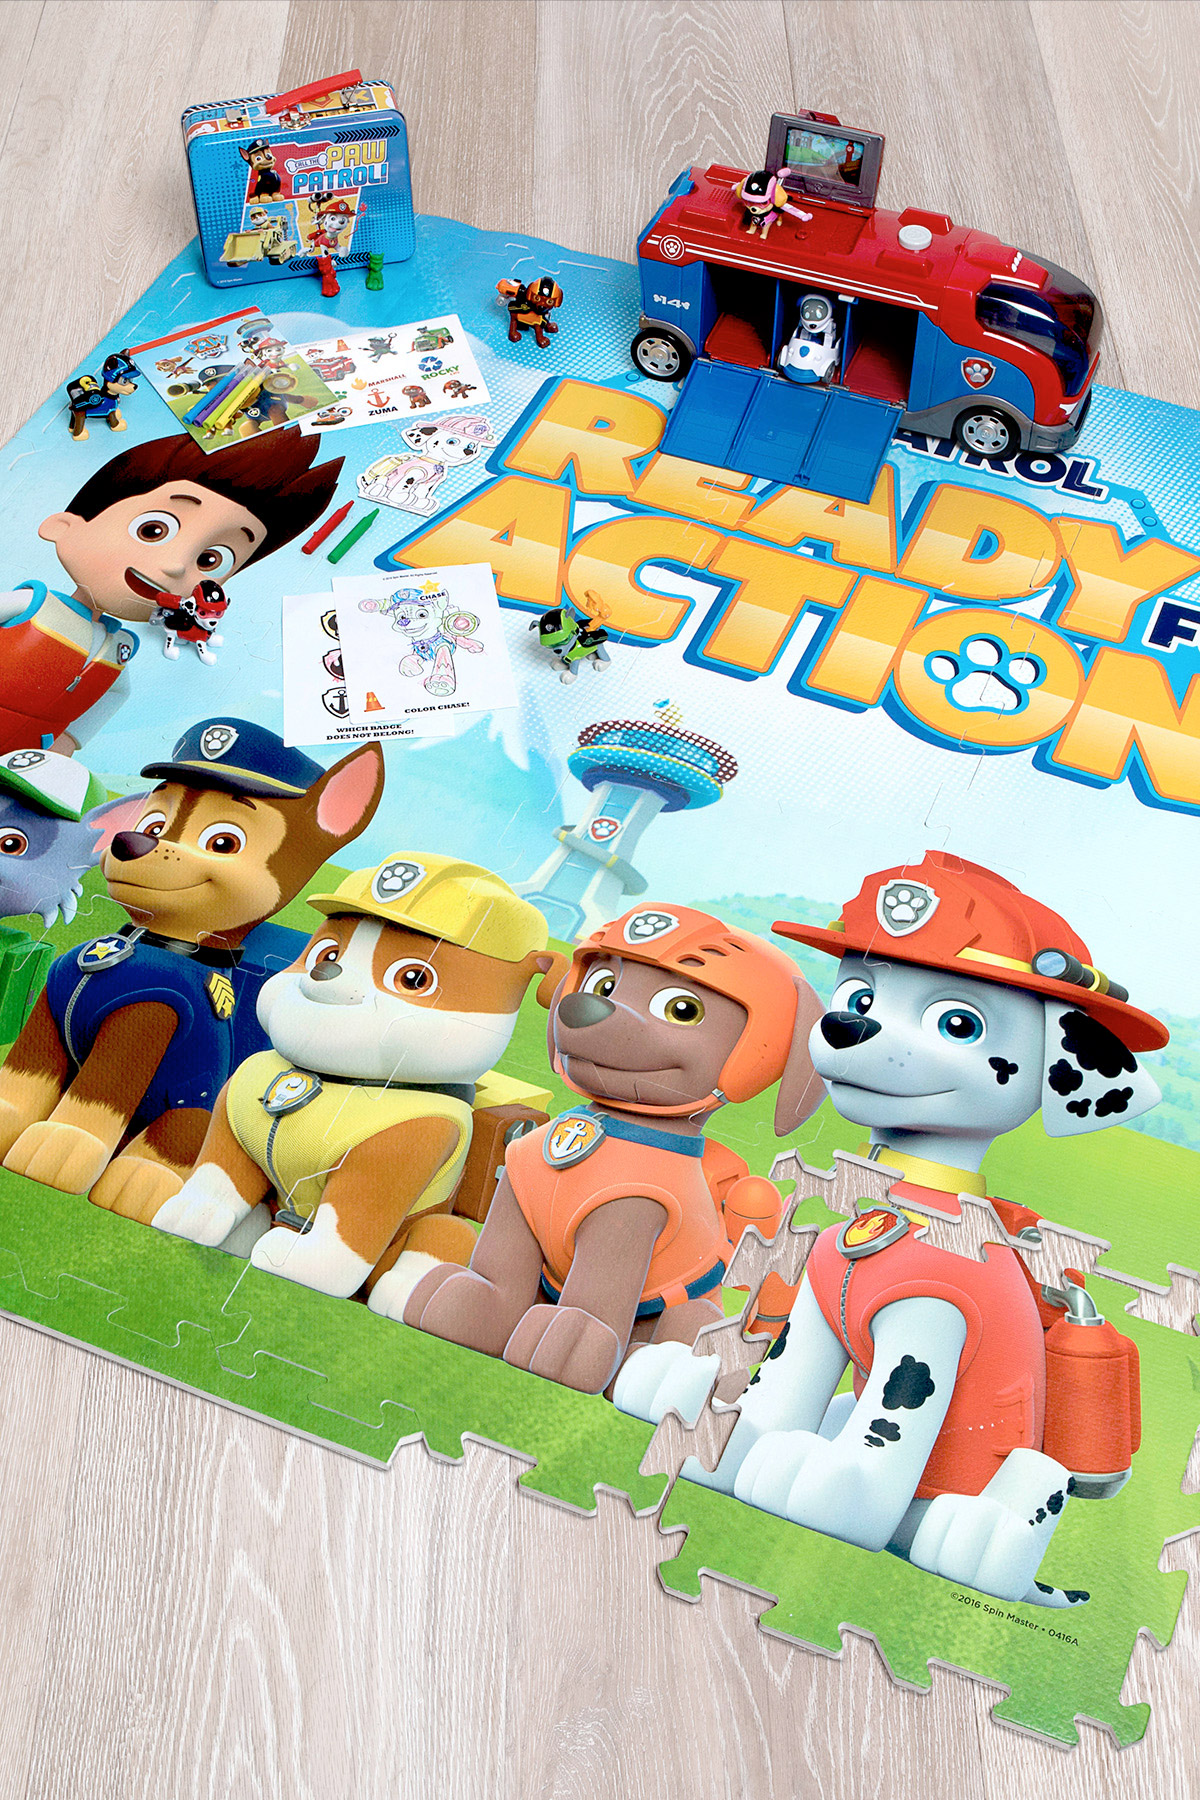 PAW Patrol Mission Play Date